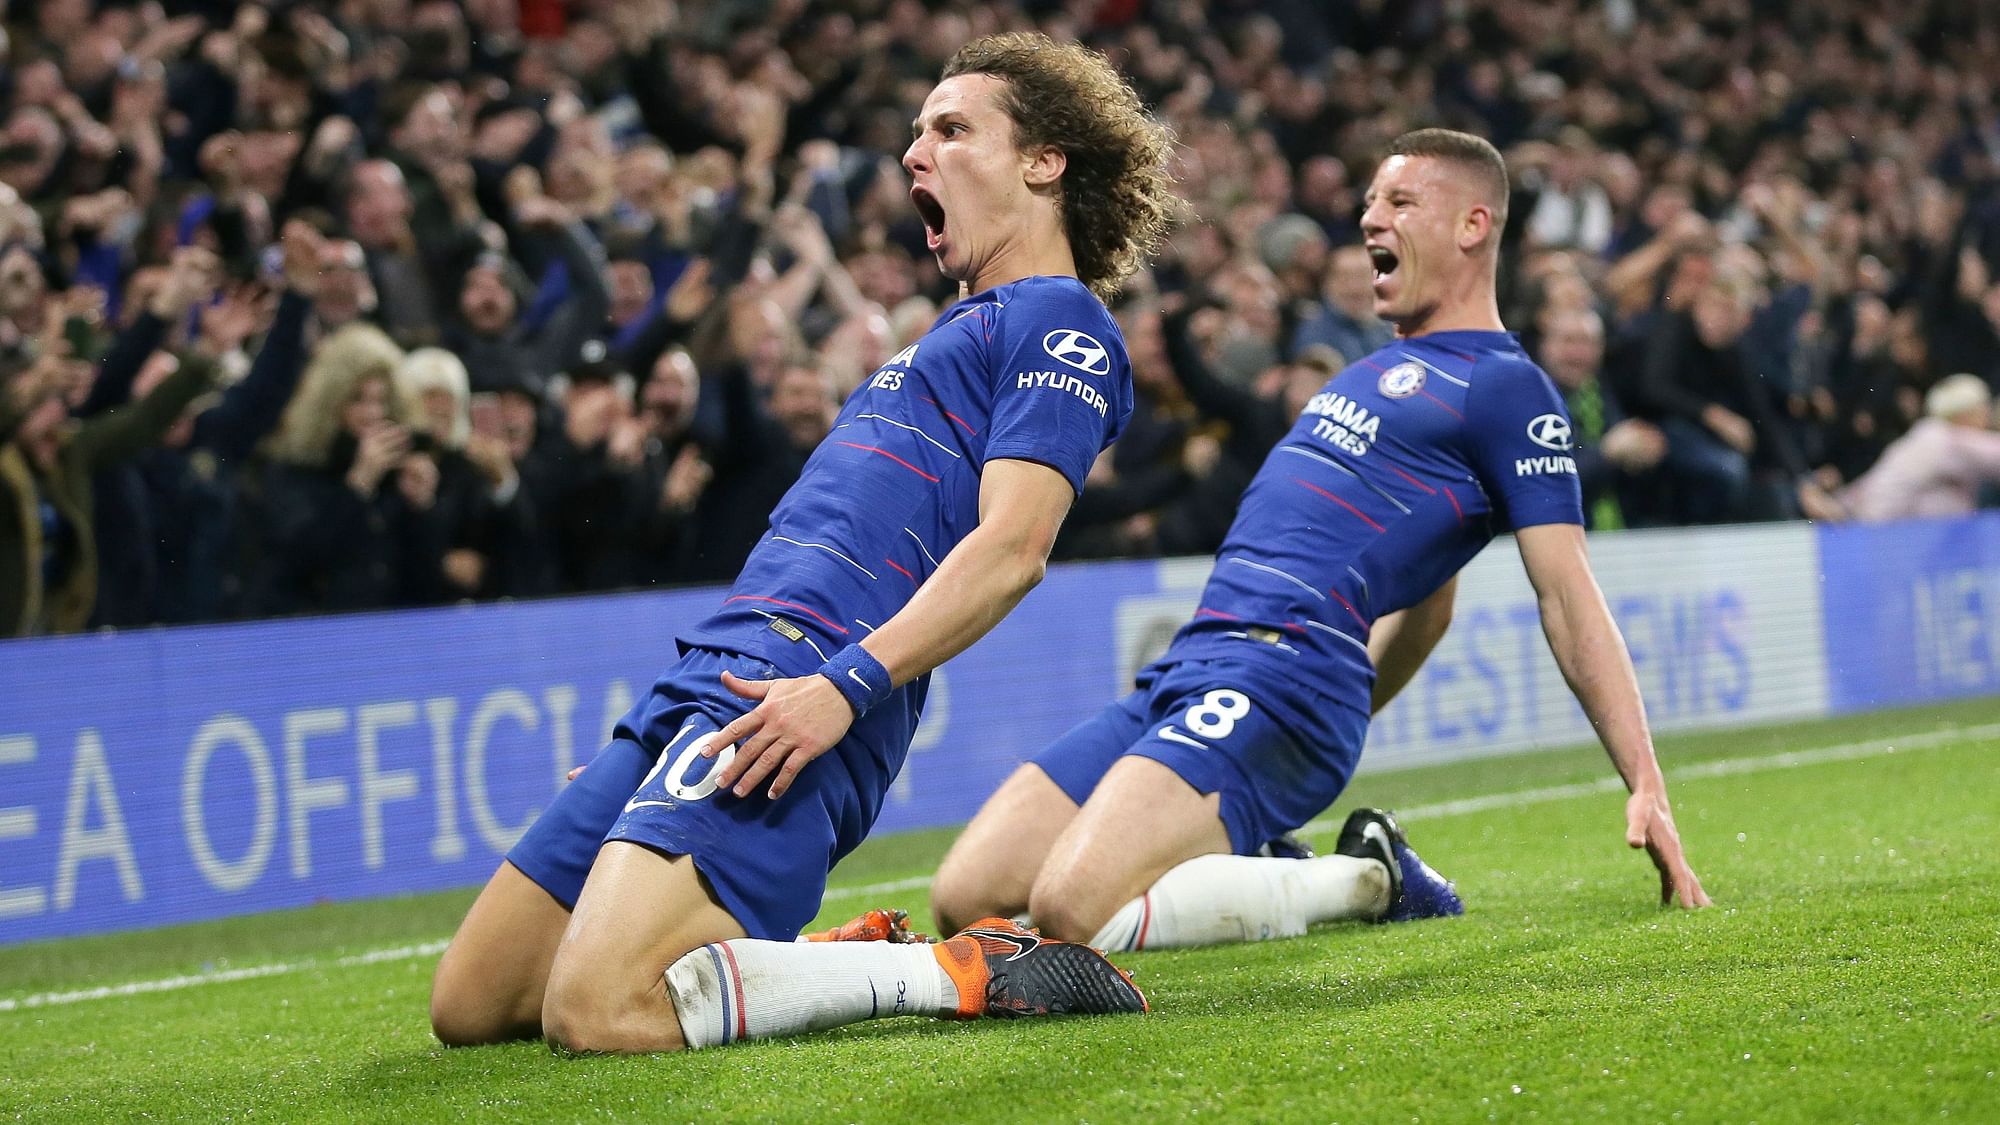 Chelsea’s David Luiz, left, celebrates after scoring his side’s opening goal during the English Premier League soccer match between Chelsea and Manchester City.